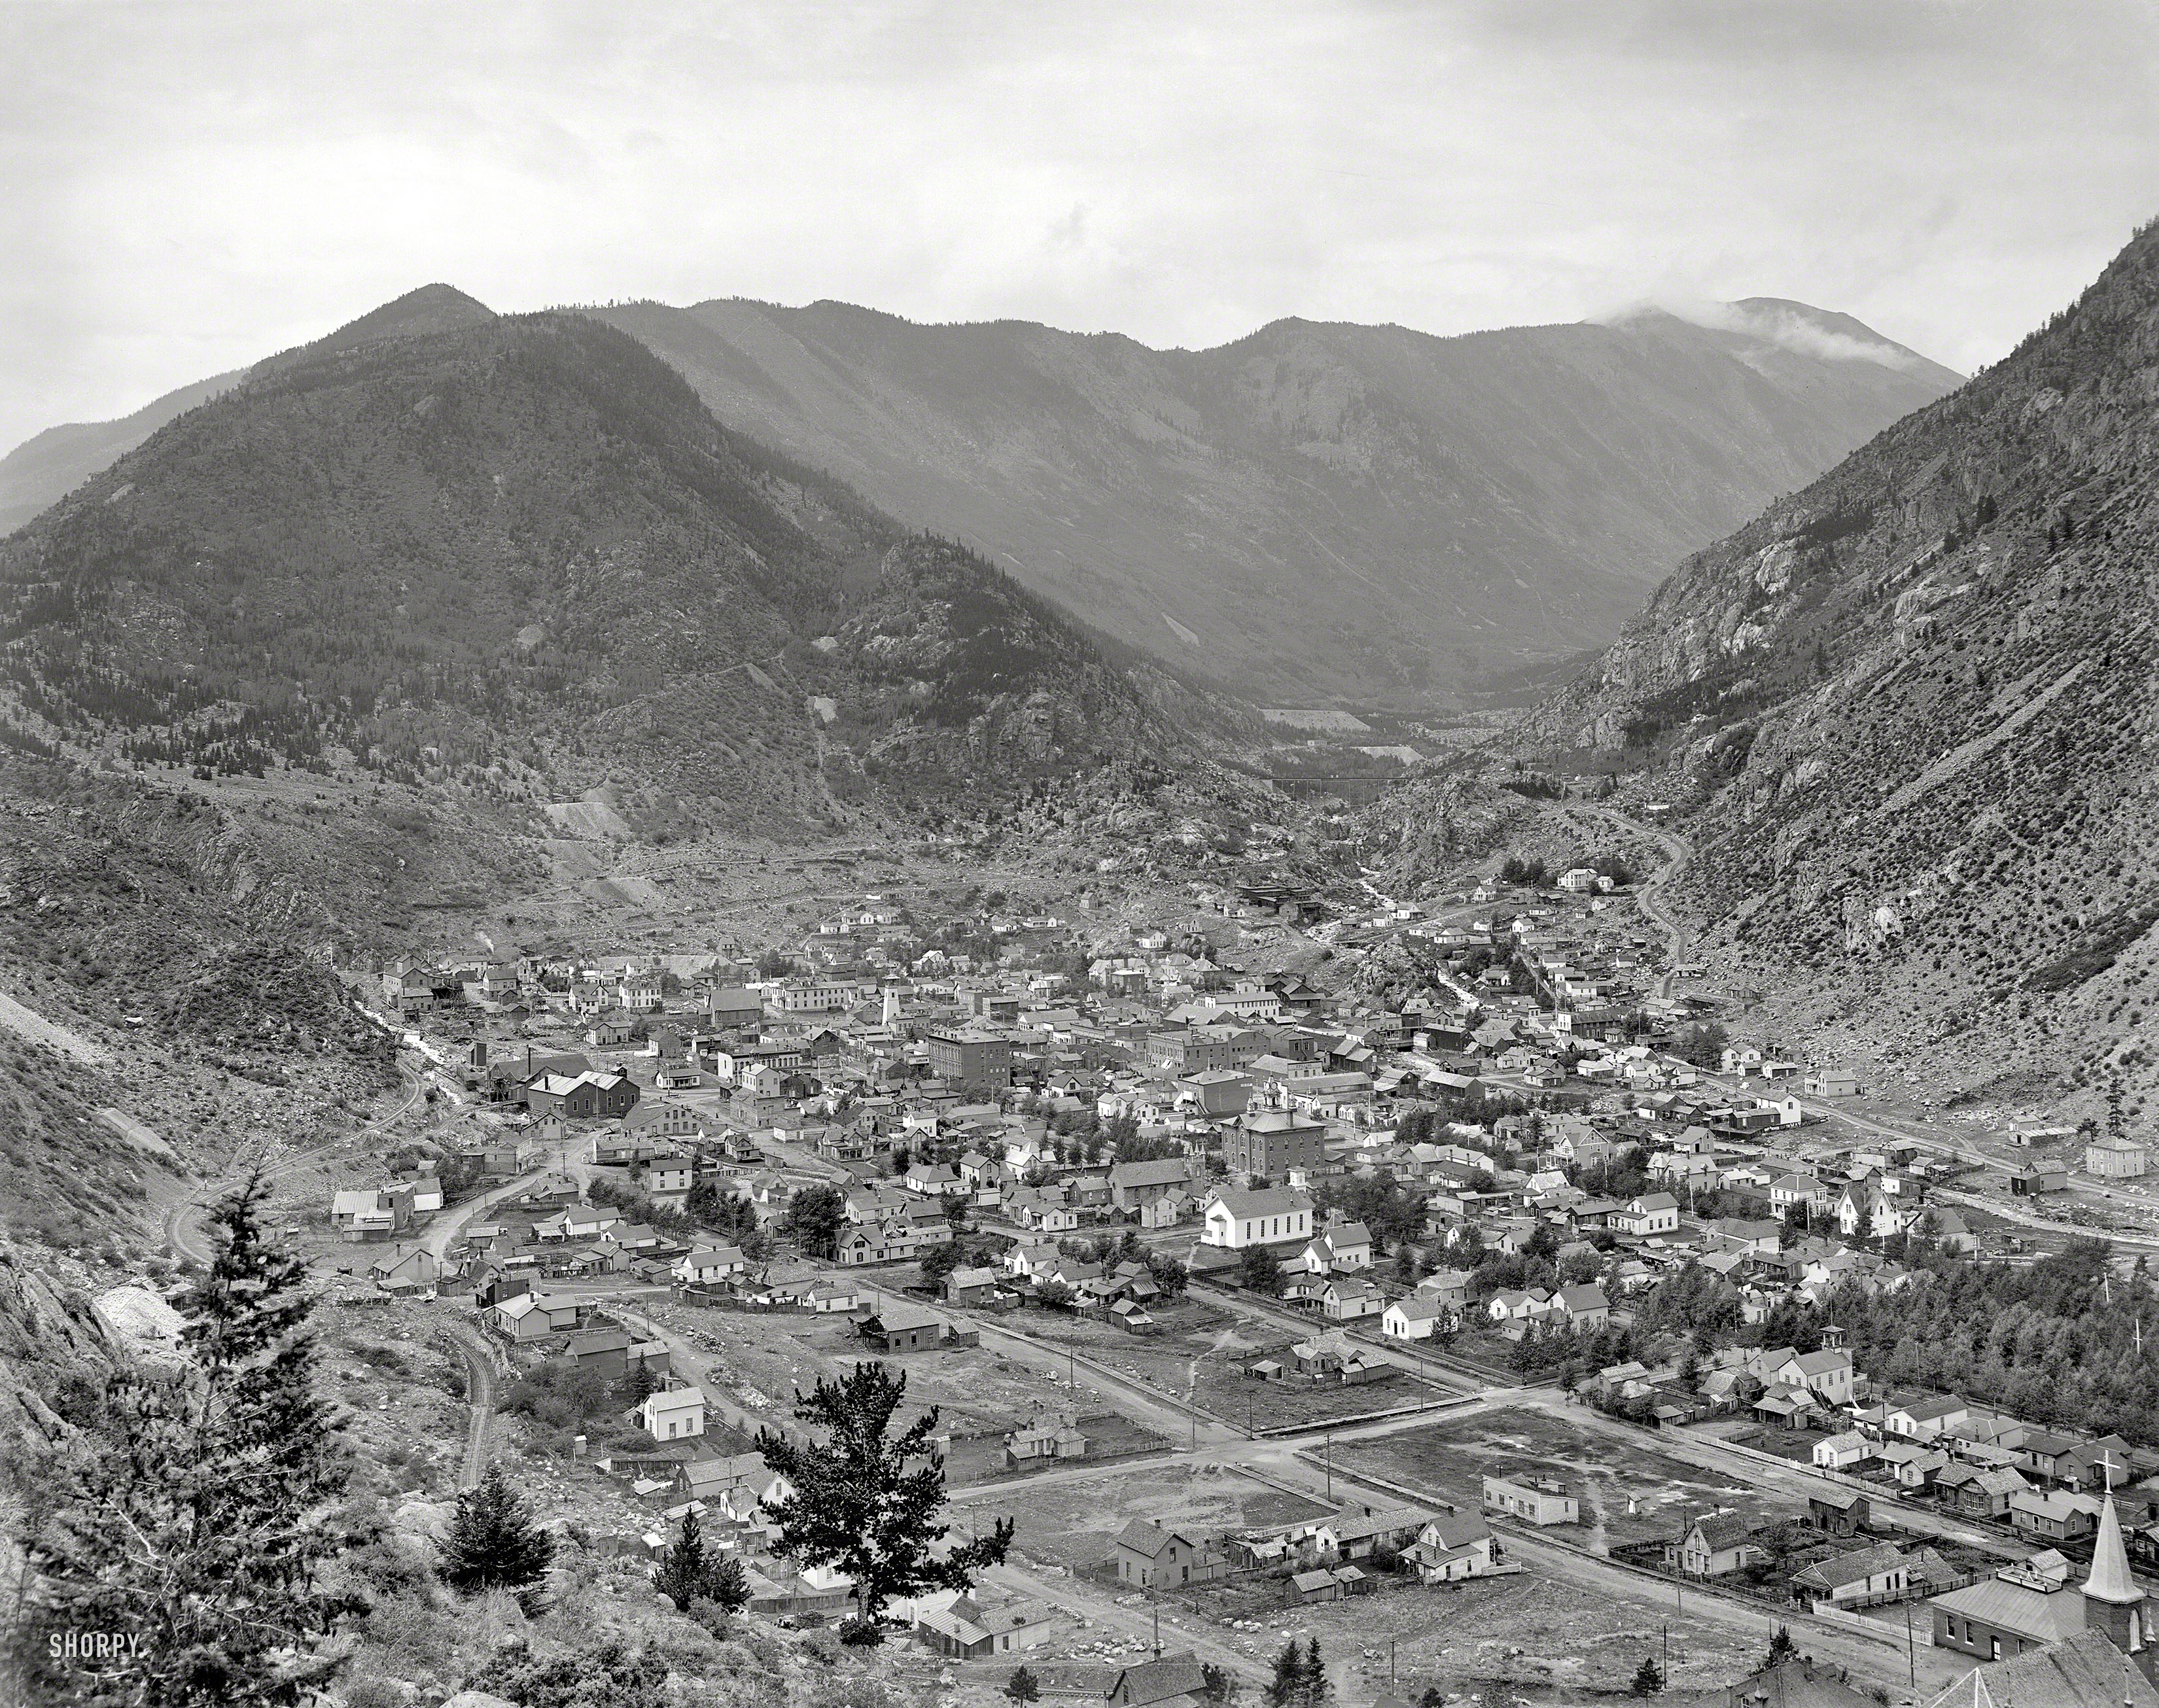 "Clear Creek Cañon." Georgetown, Colorado, circa 1901. Famous for the Georgetown Loop, a narrow-gauge railroad visible in the distance. 8x10 glass plate by William Henry Jackson, Detroit Publishing Co. View full size.